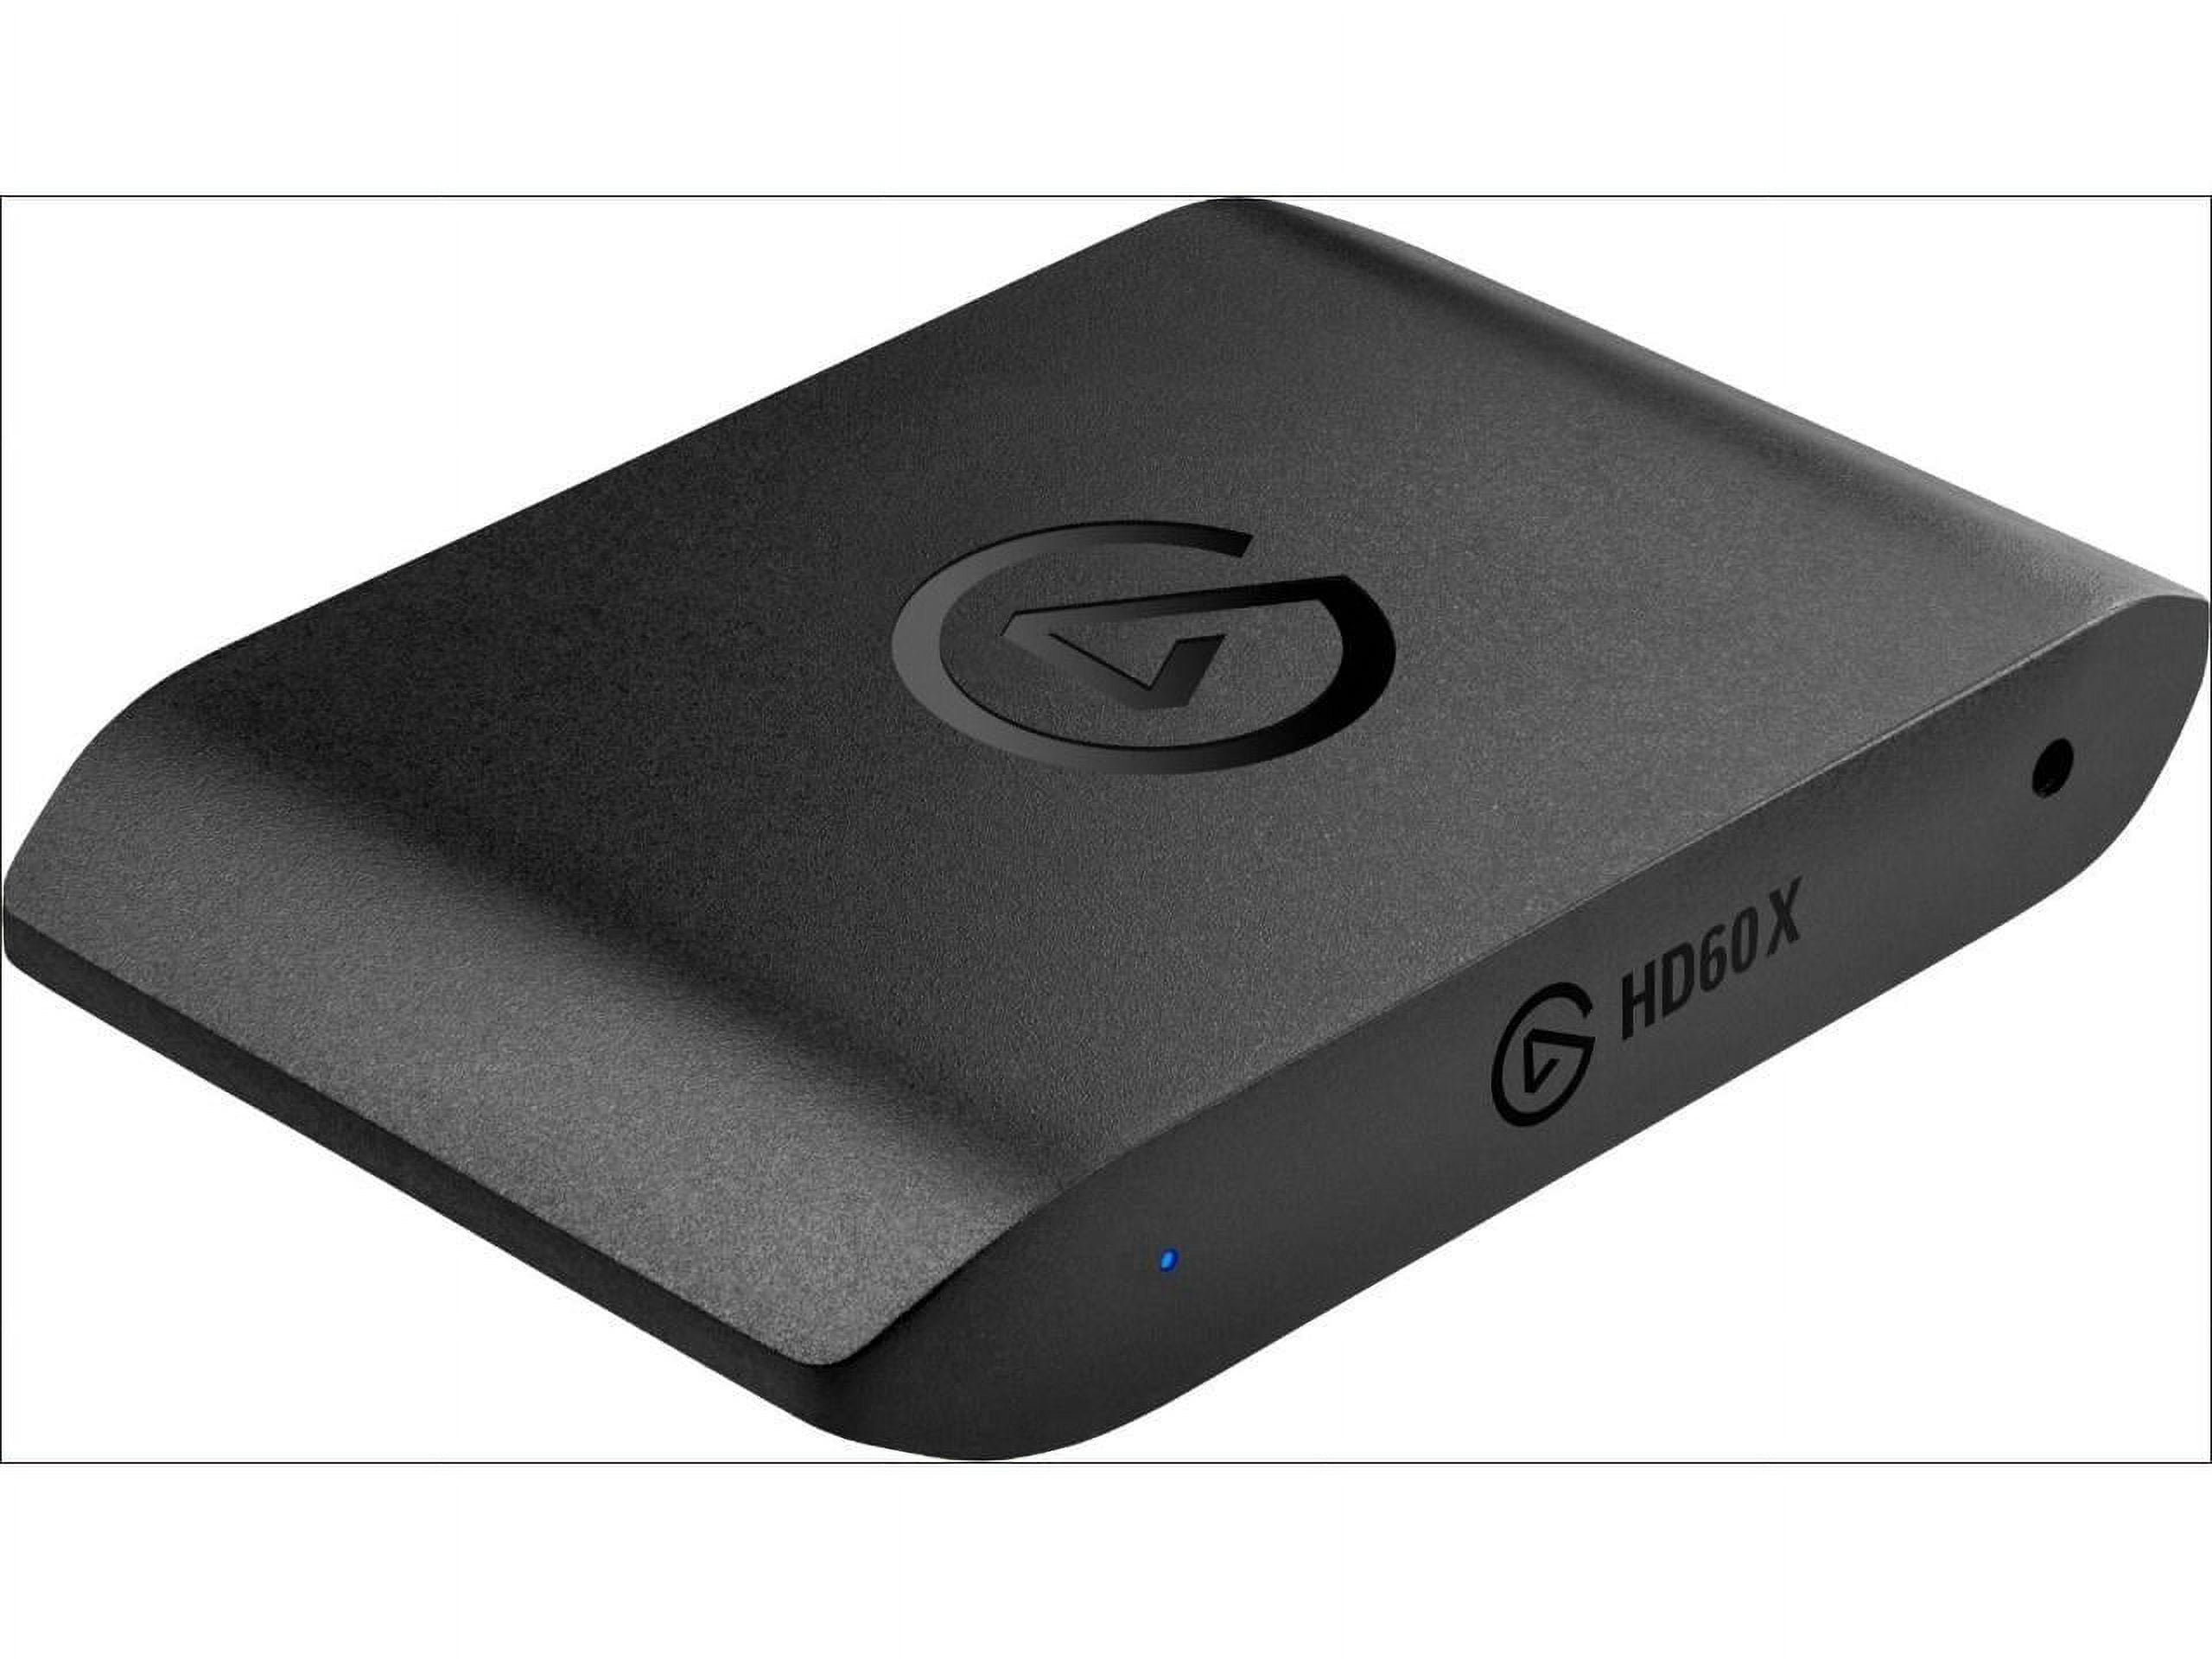 Elgato - HD60 X 1080p60 HDR10 External Capture Card for PS5, PS4/Pro, Xbox  Series X/S, Xbox One X/S, PC, and Mac - Black 